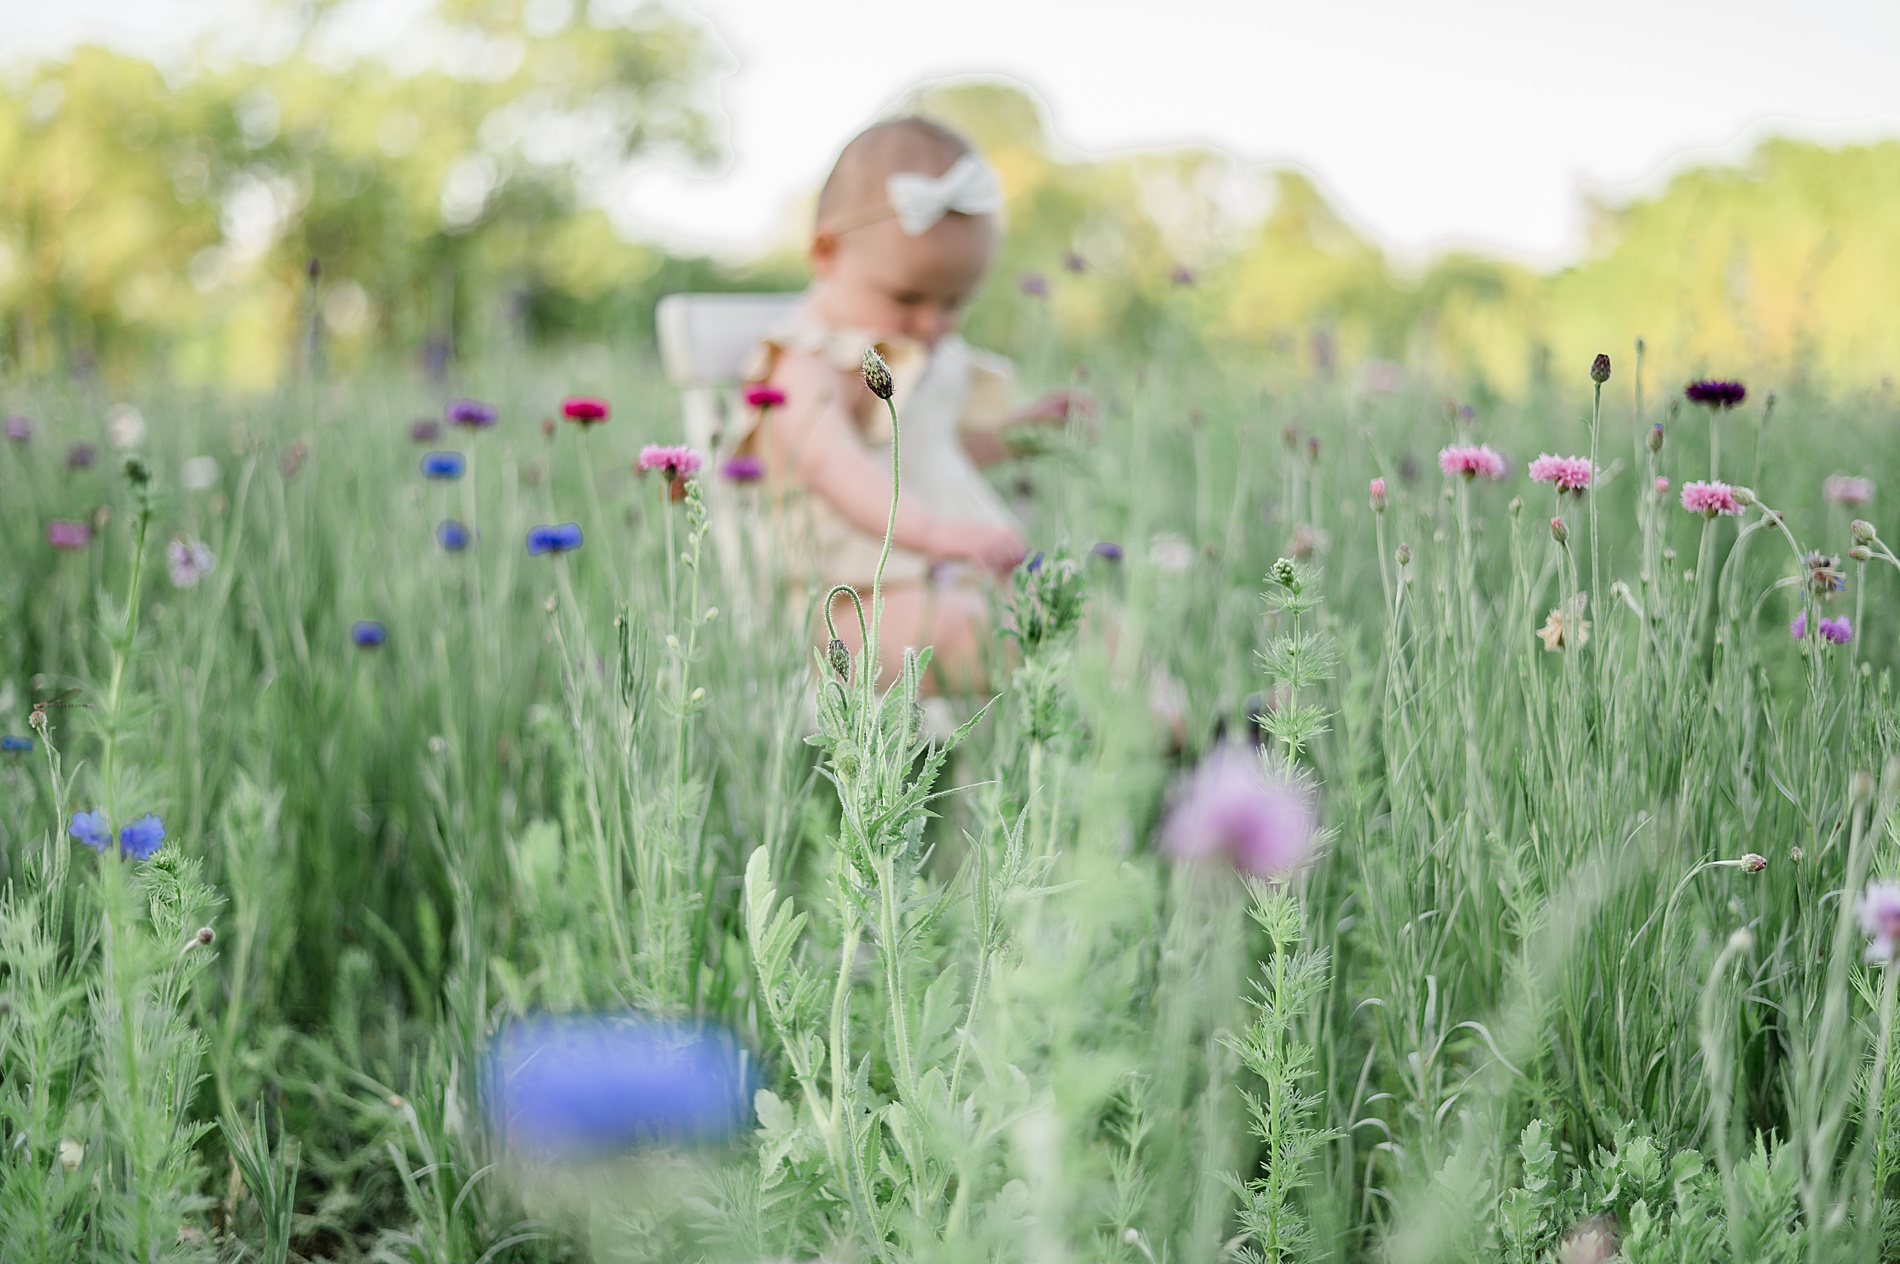 candid photo of little girl in wildflower field taken by Lindsey Dutton Photography, a Dallas family photographer